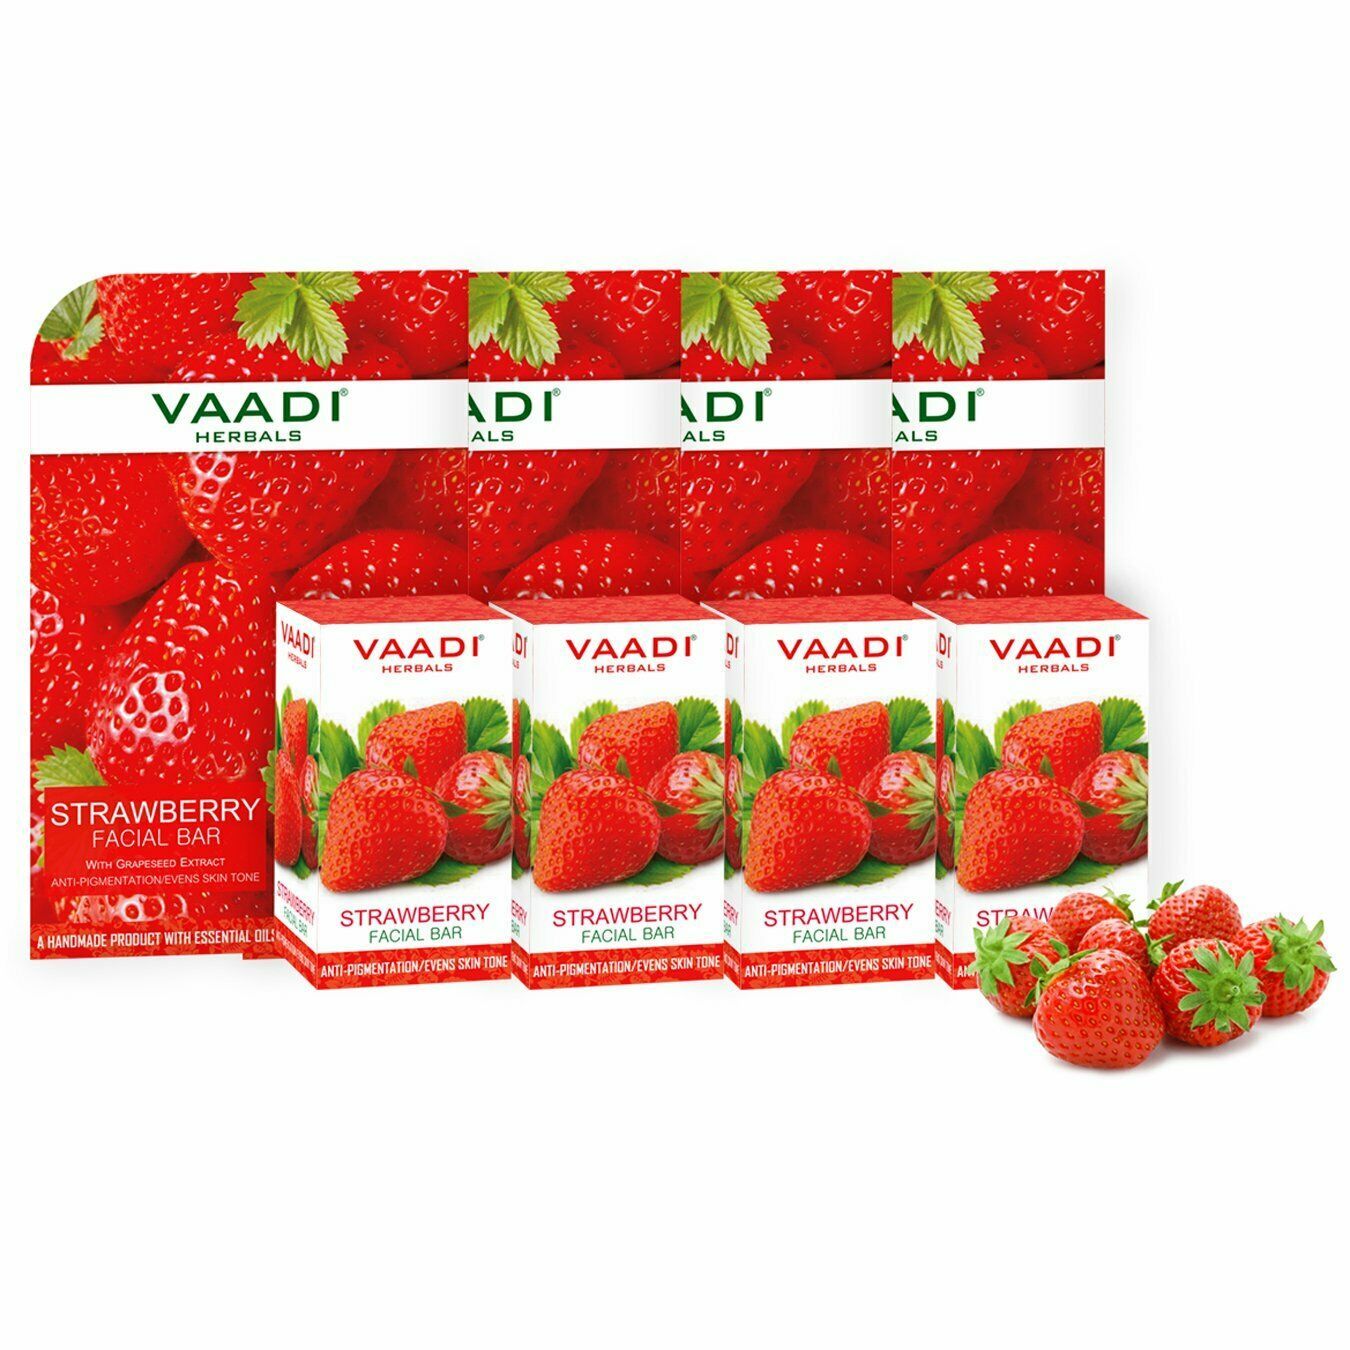 Vaadi Herbals Value Strawberry Facial Bars with Grape Seed Extract, 25 gm